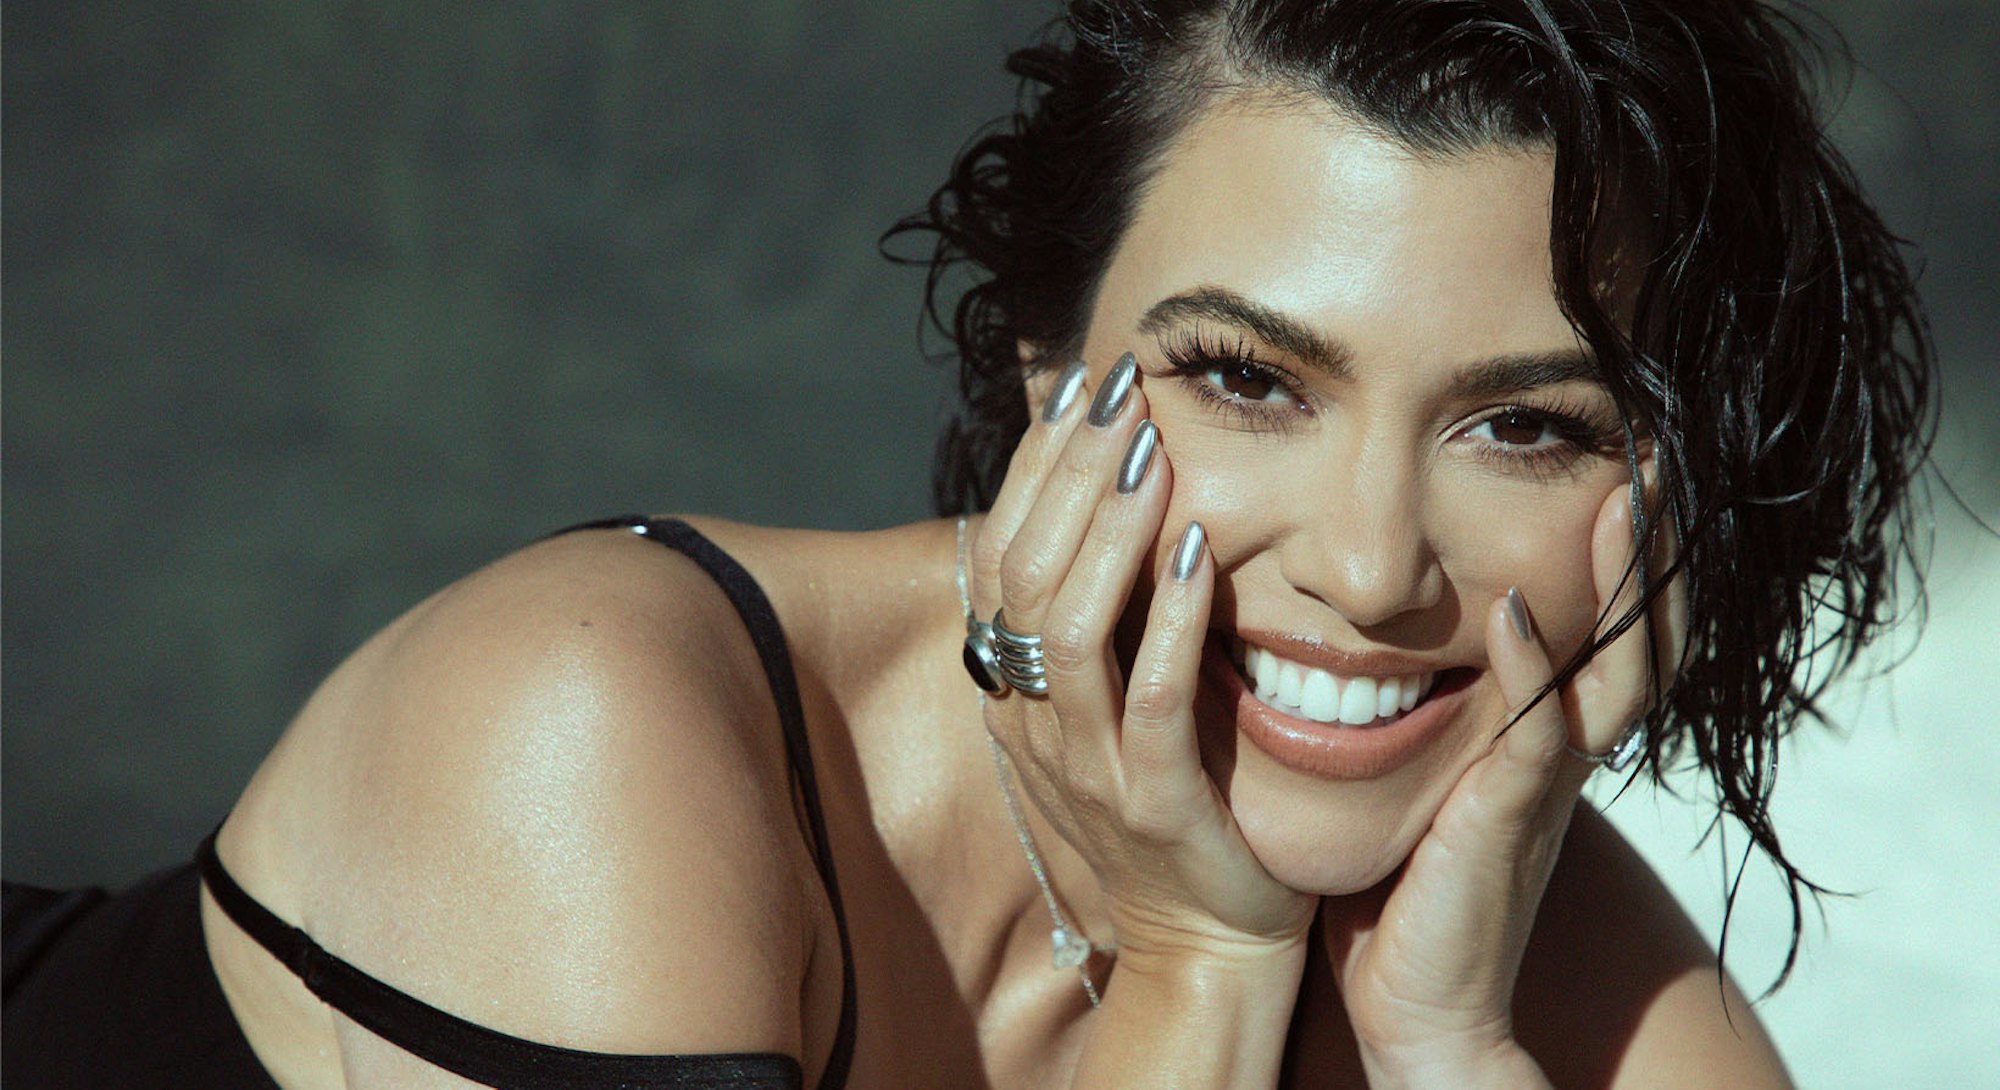 Kourtney Kardashian smiling with her face leaning against her hands